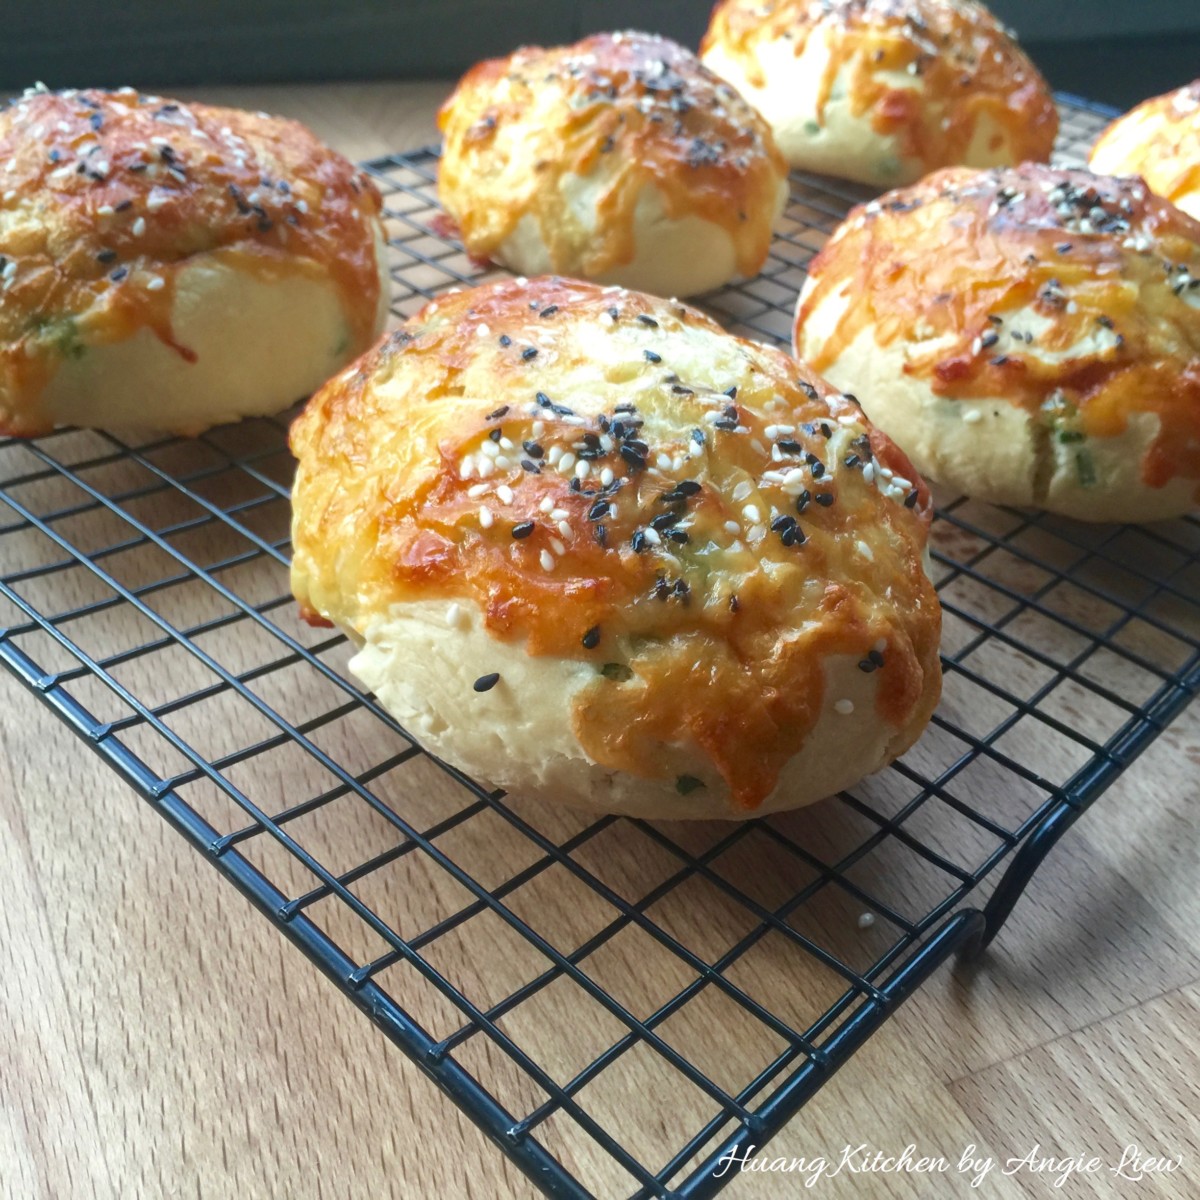 Cool baked scones.